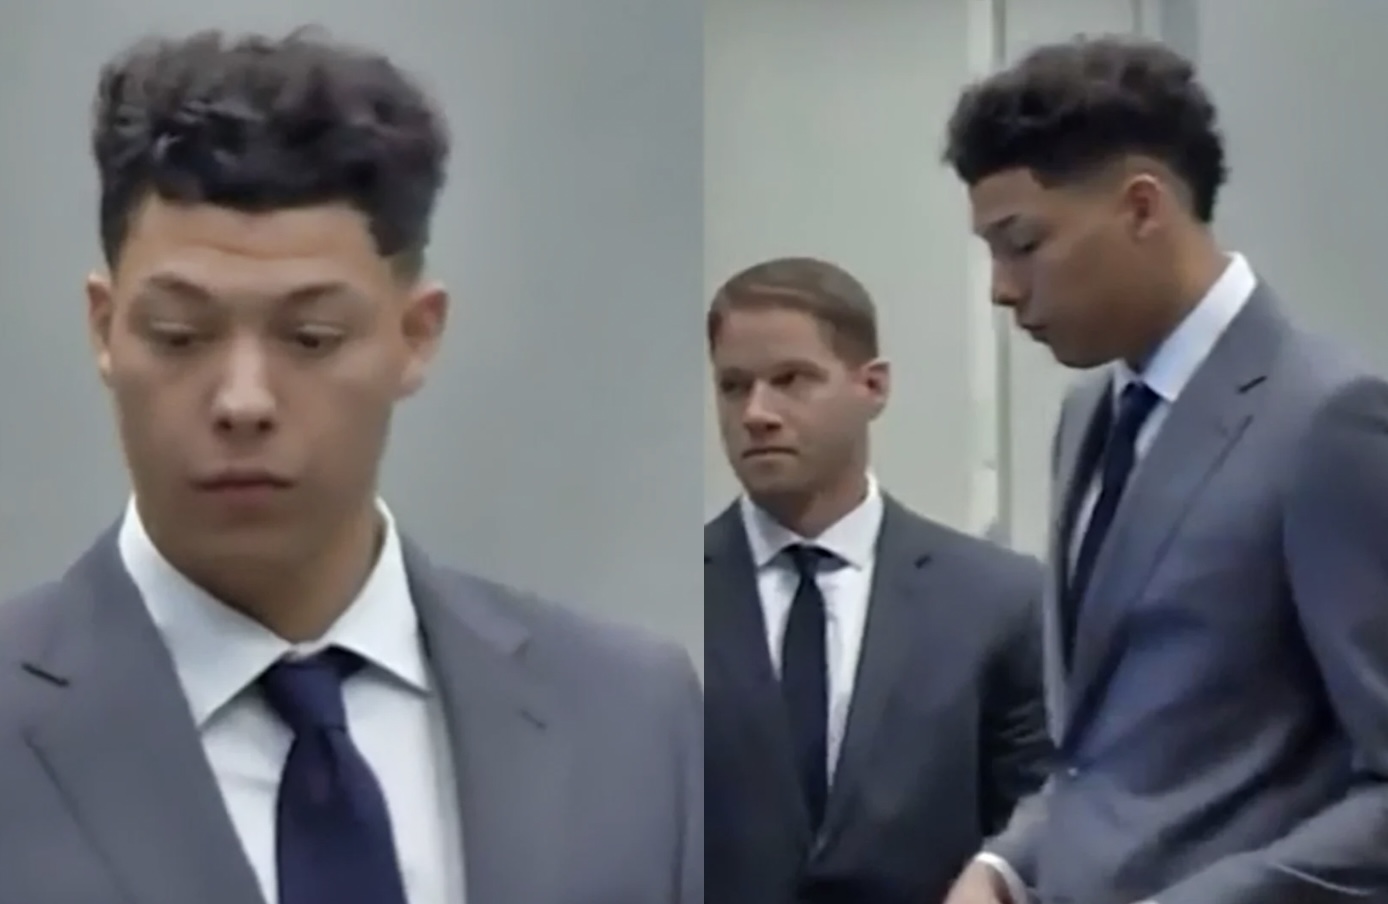 Details of Jackson Mahomes Having His Bond Modified In Recent Court Appearance